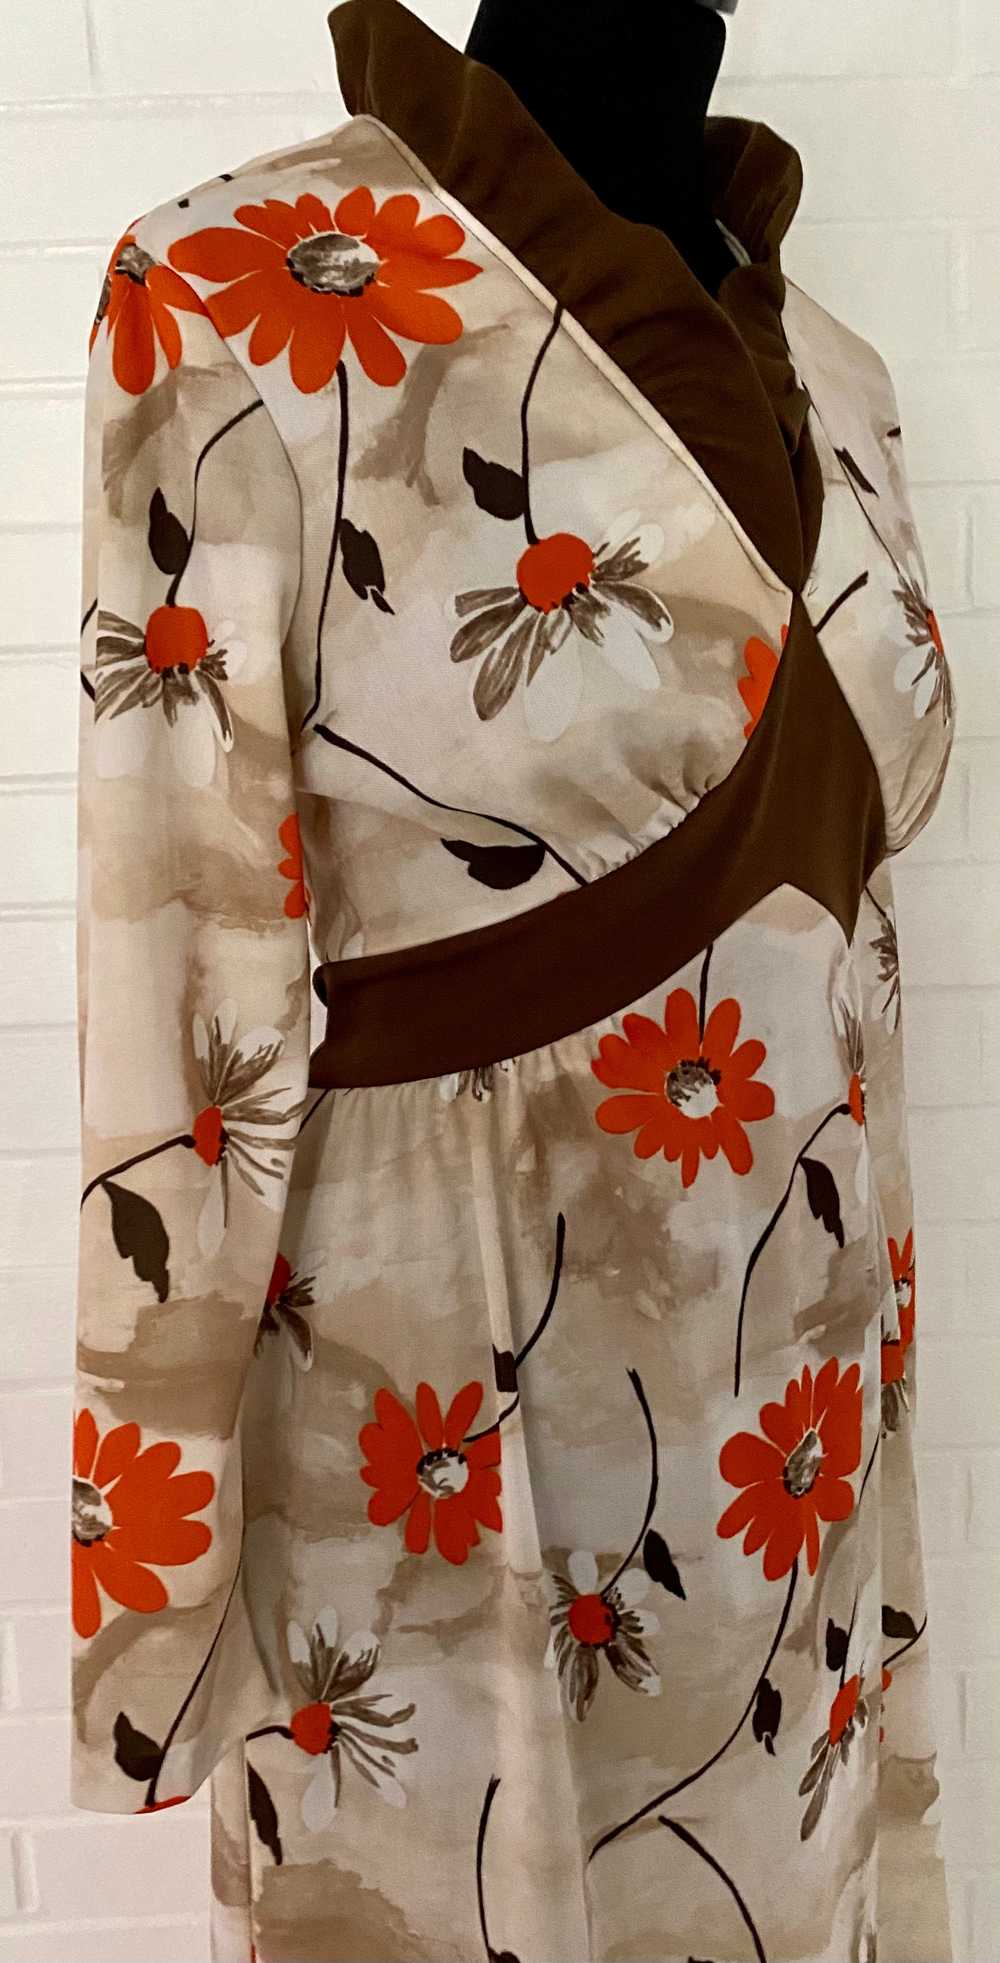 Late 60s/ Early 70s Flowered Maxi Dress - image 2